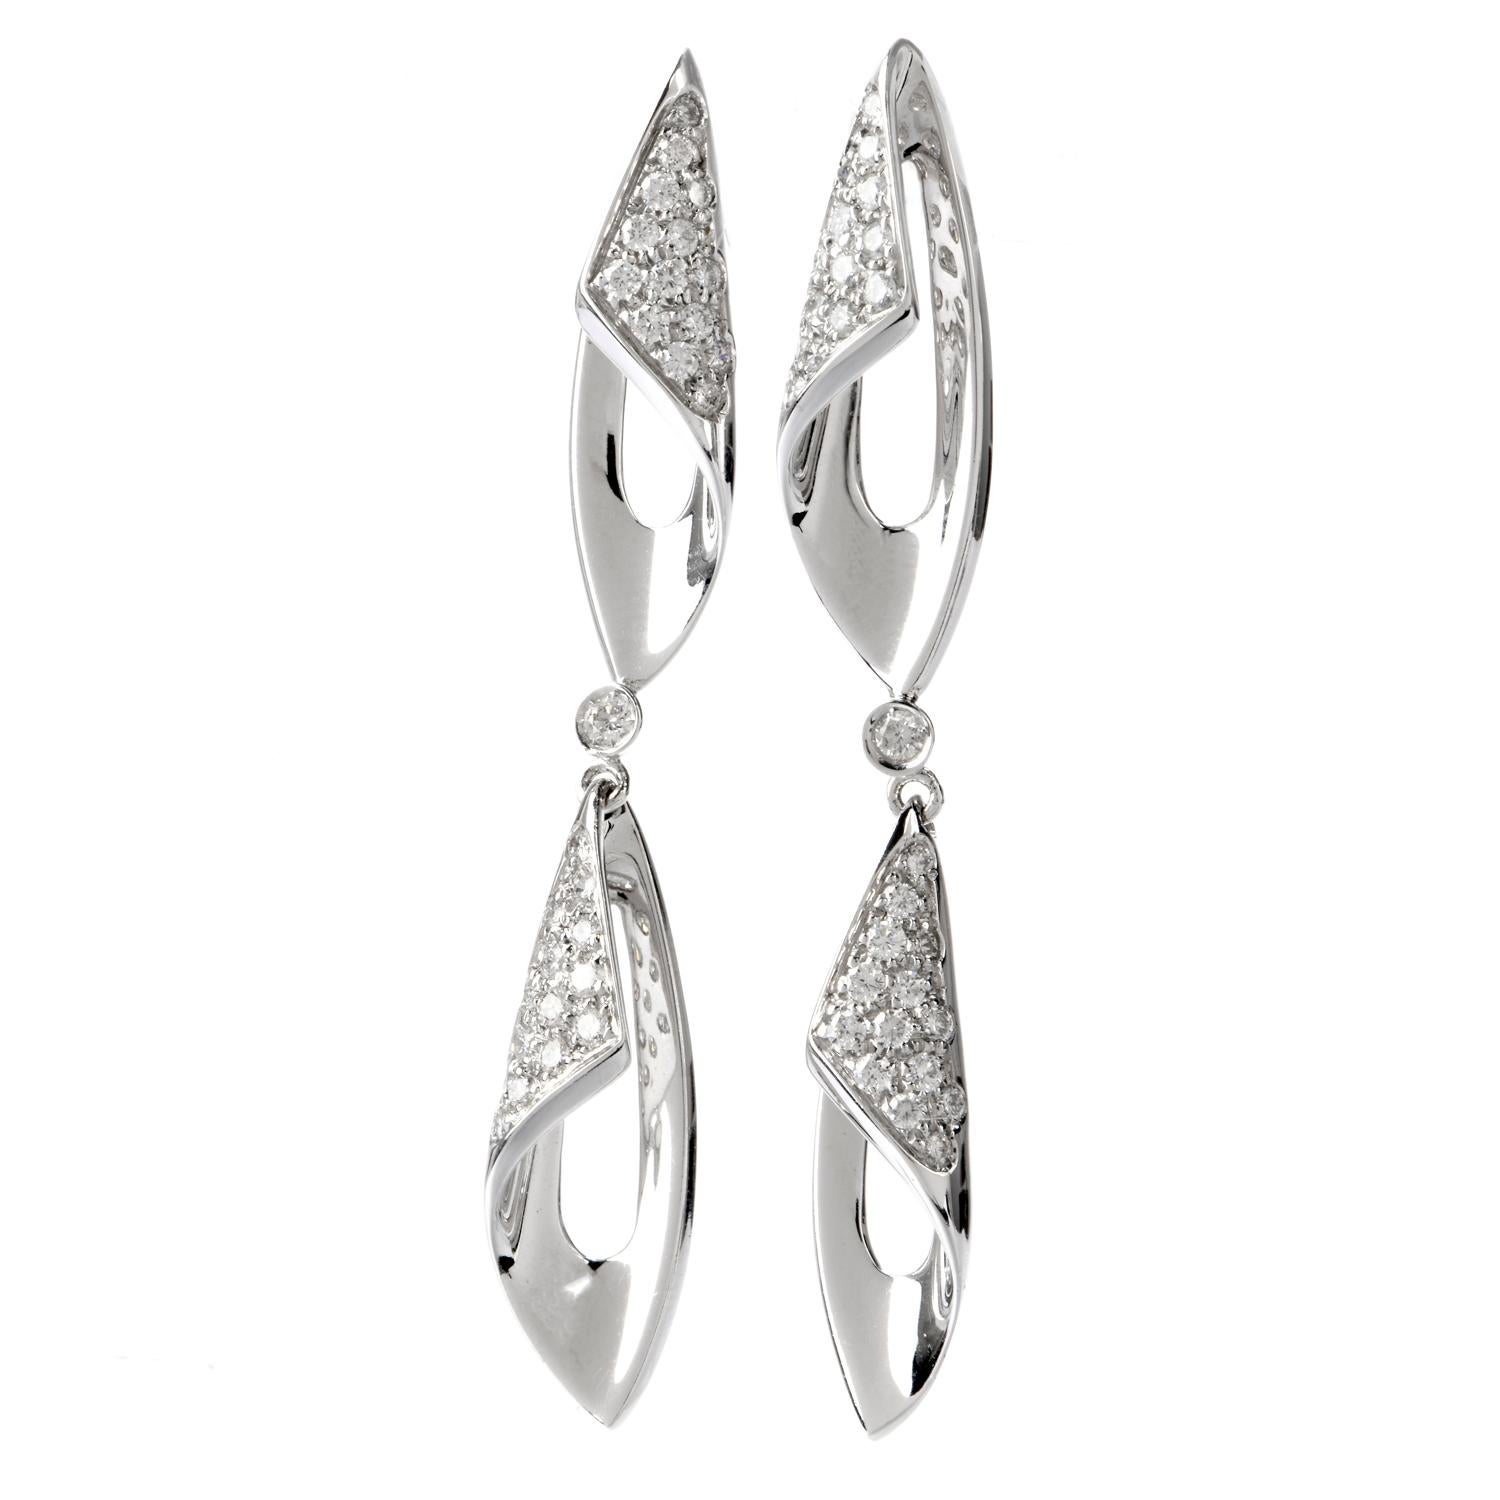 These elegant and glistening Evening Wear Earrings were inspired as a Split

Curving Dangle and crafted in 18K White Gold.

2 Curving pave DIamond links are connected centrally

by a single bezel set Diamond.

Diamonds weigh appx. 1.00 Carat and are